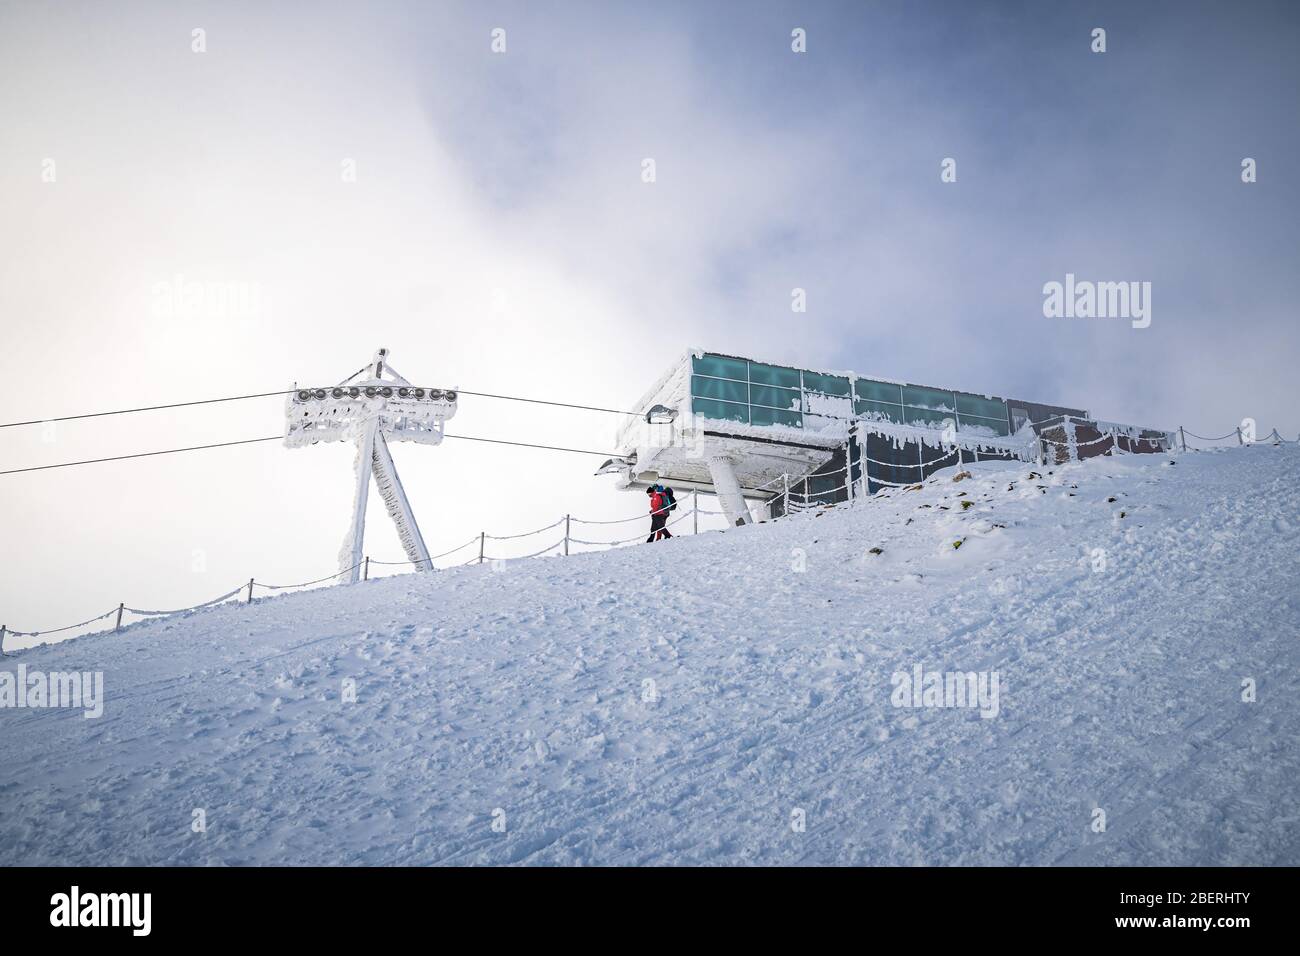 Cableway station on Snezka or Sniezka summit in Giant Mountains, Krkonose National Park, Czech Republic. Stock Photo